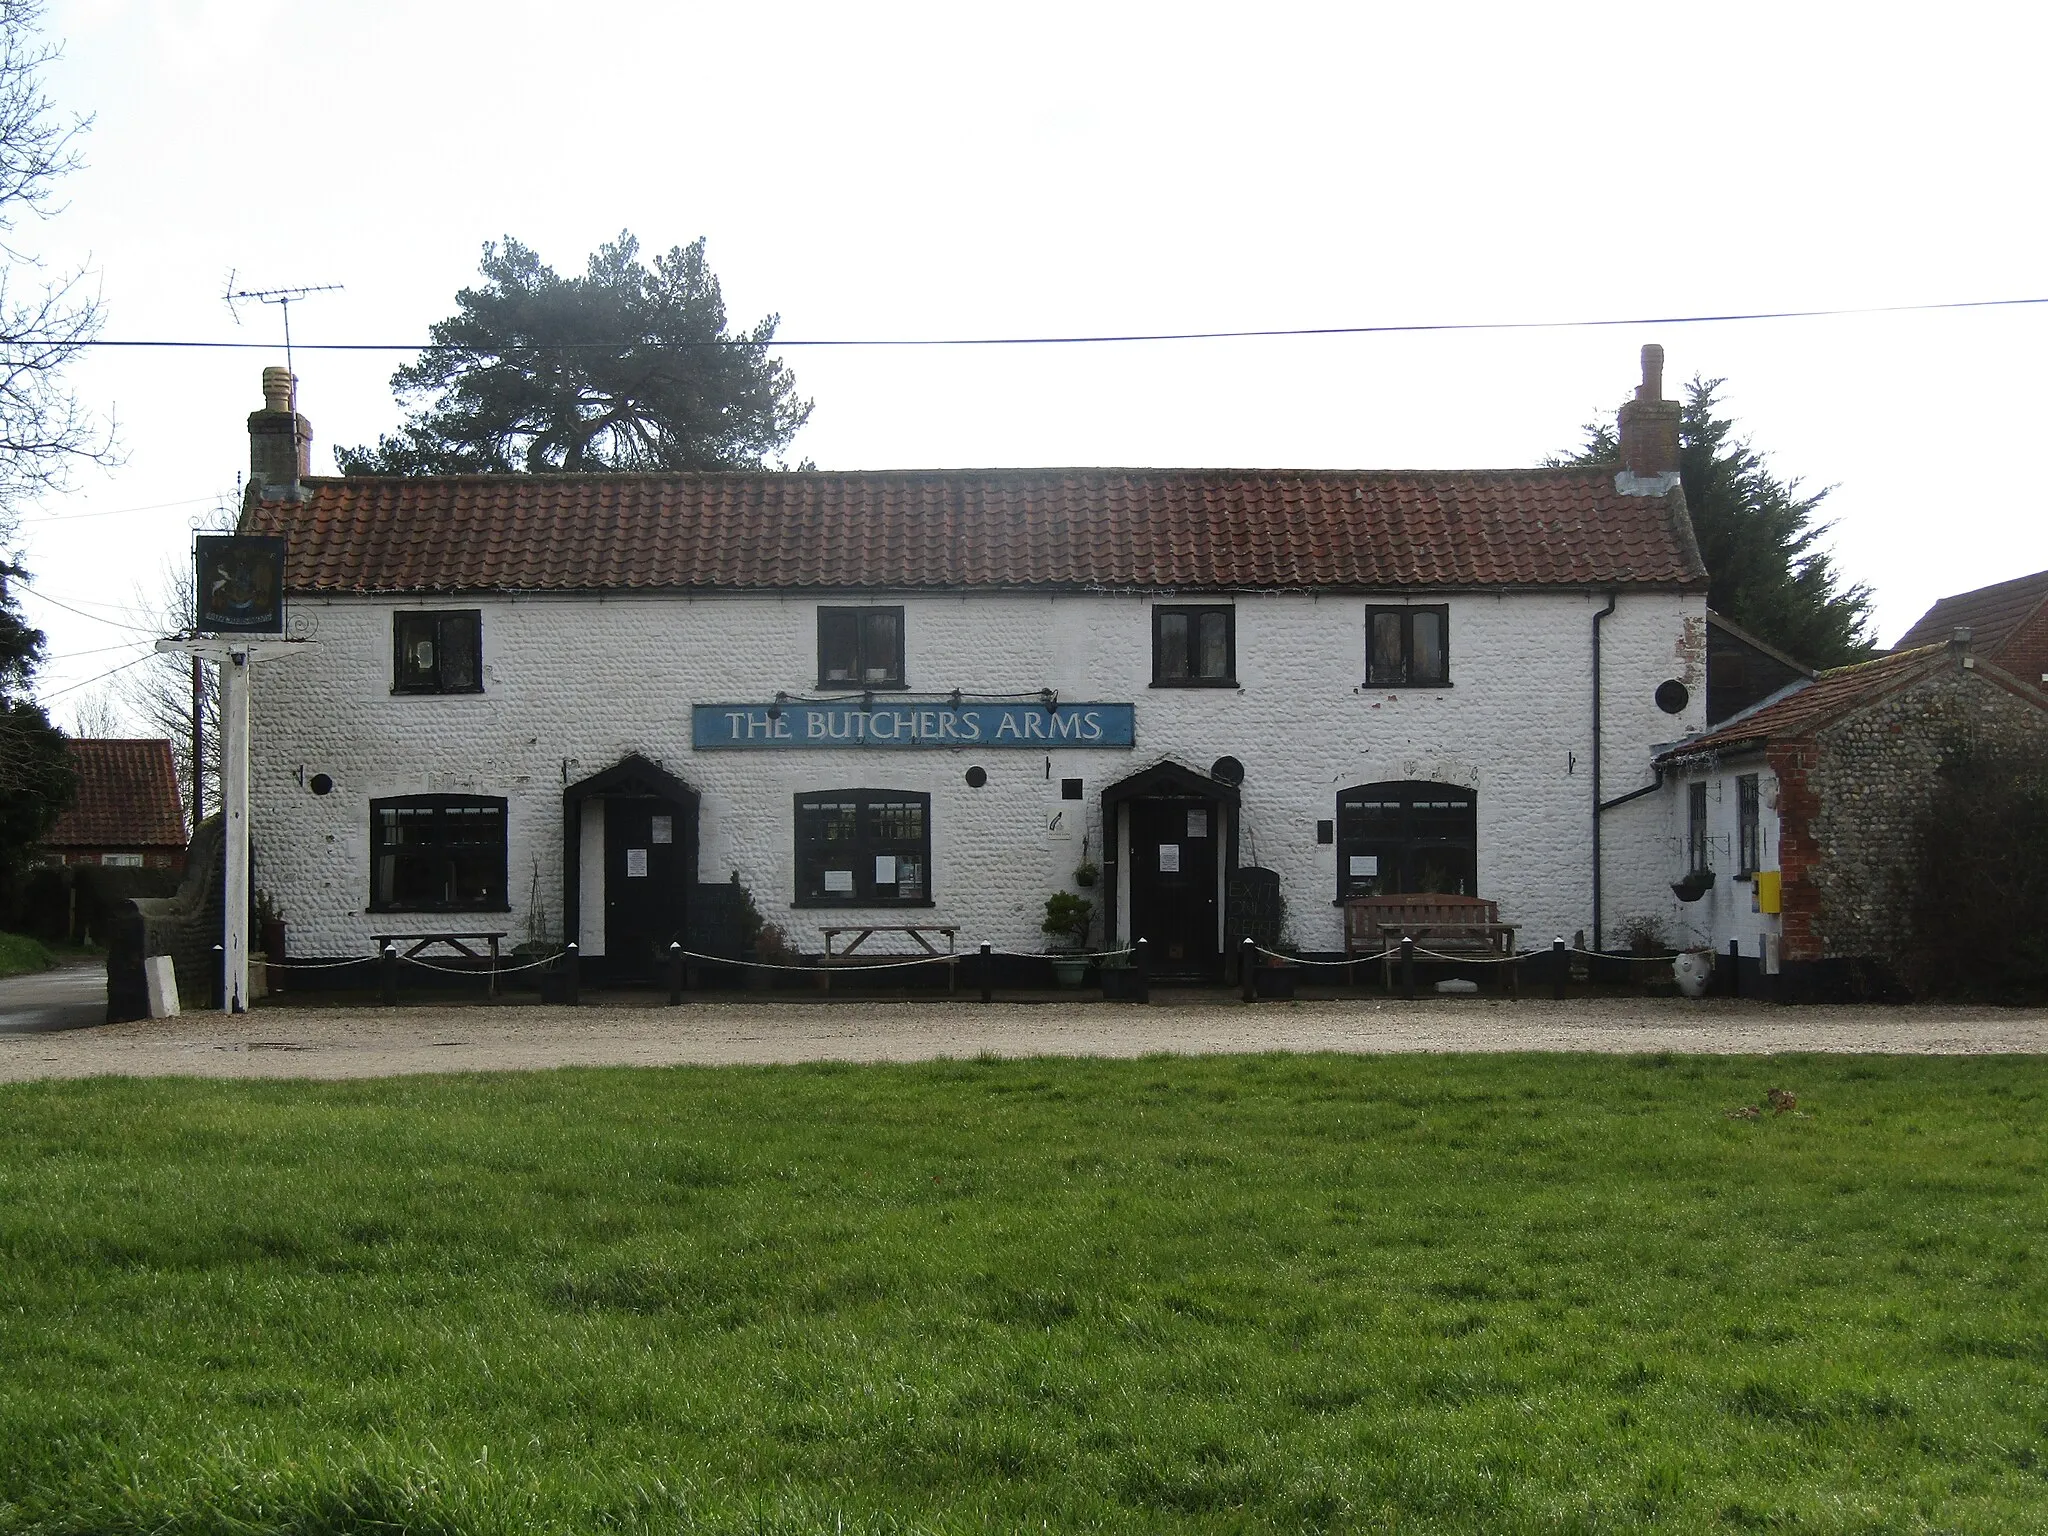 Photo showing: The Butchers Arms public house is located on Oak Lane in the village East Ruston, Norfolk, England.